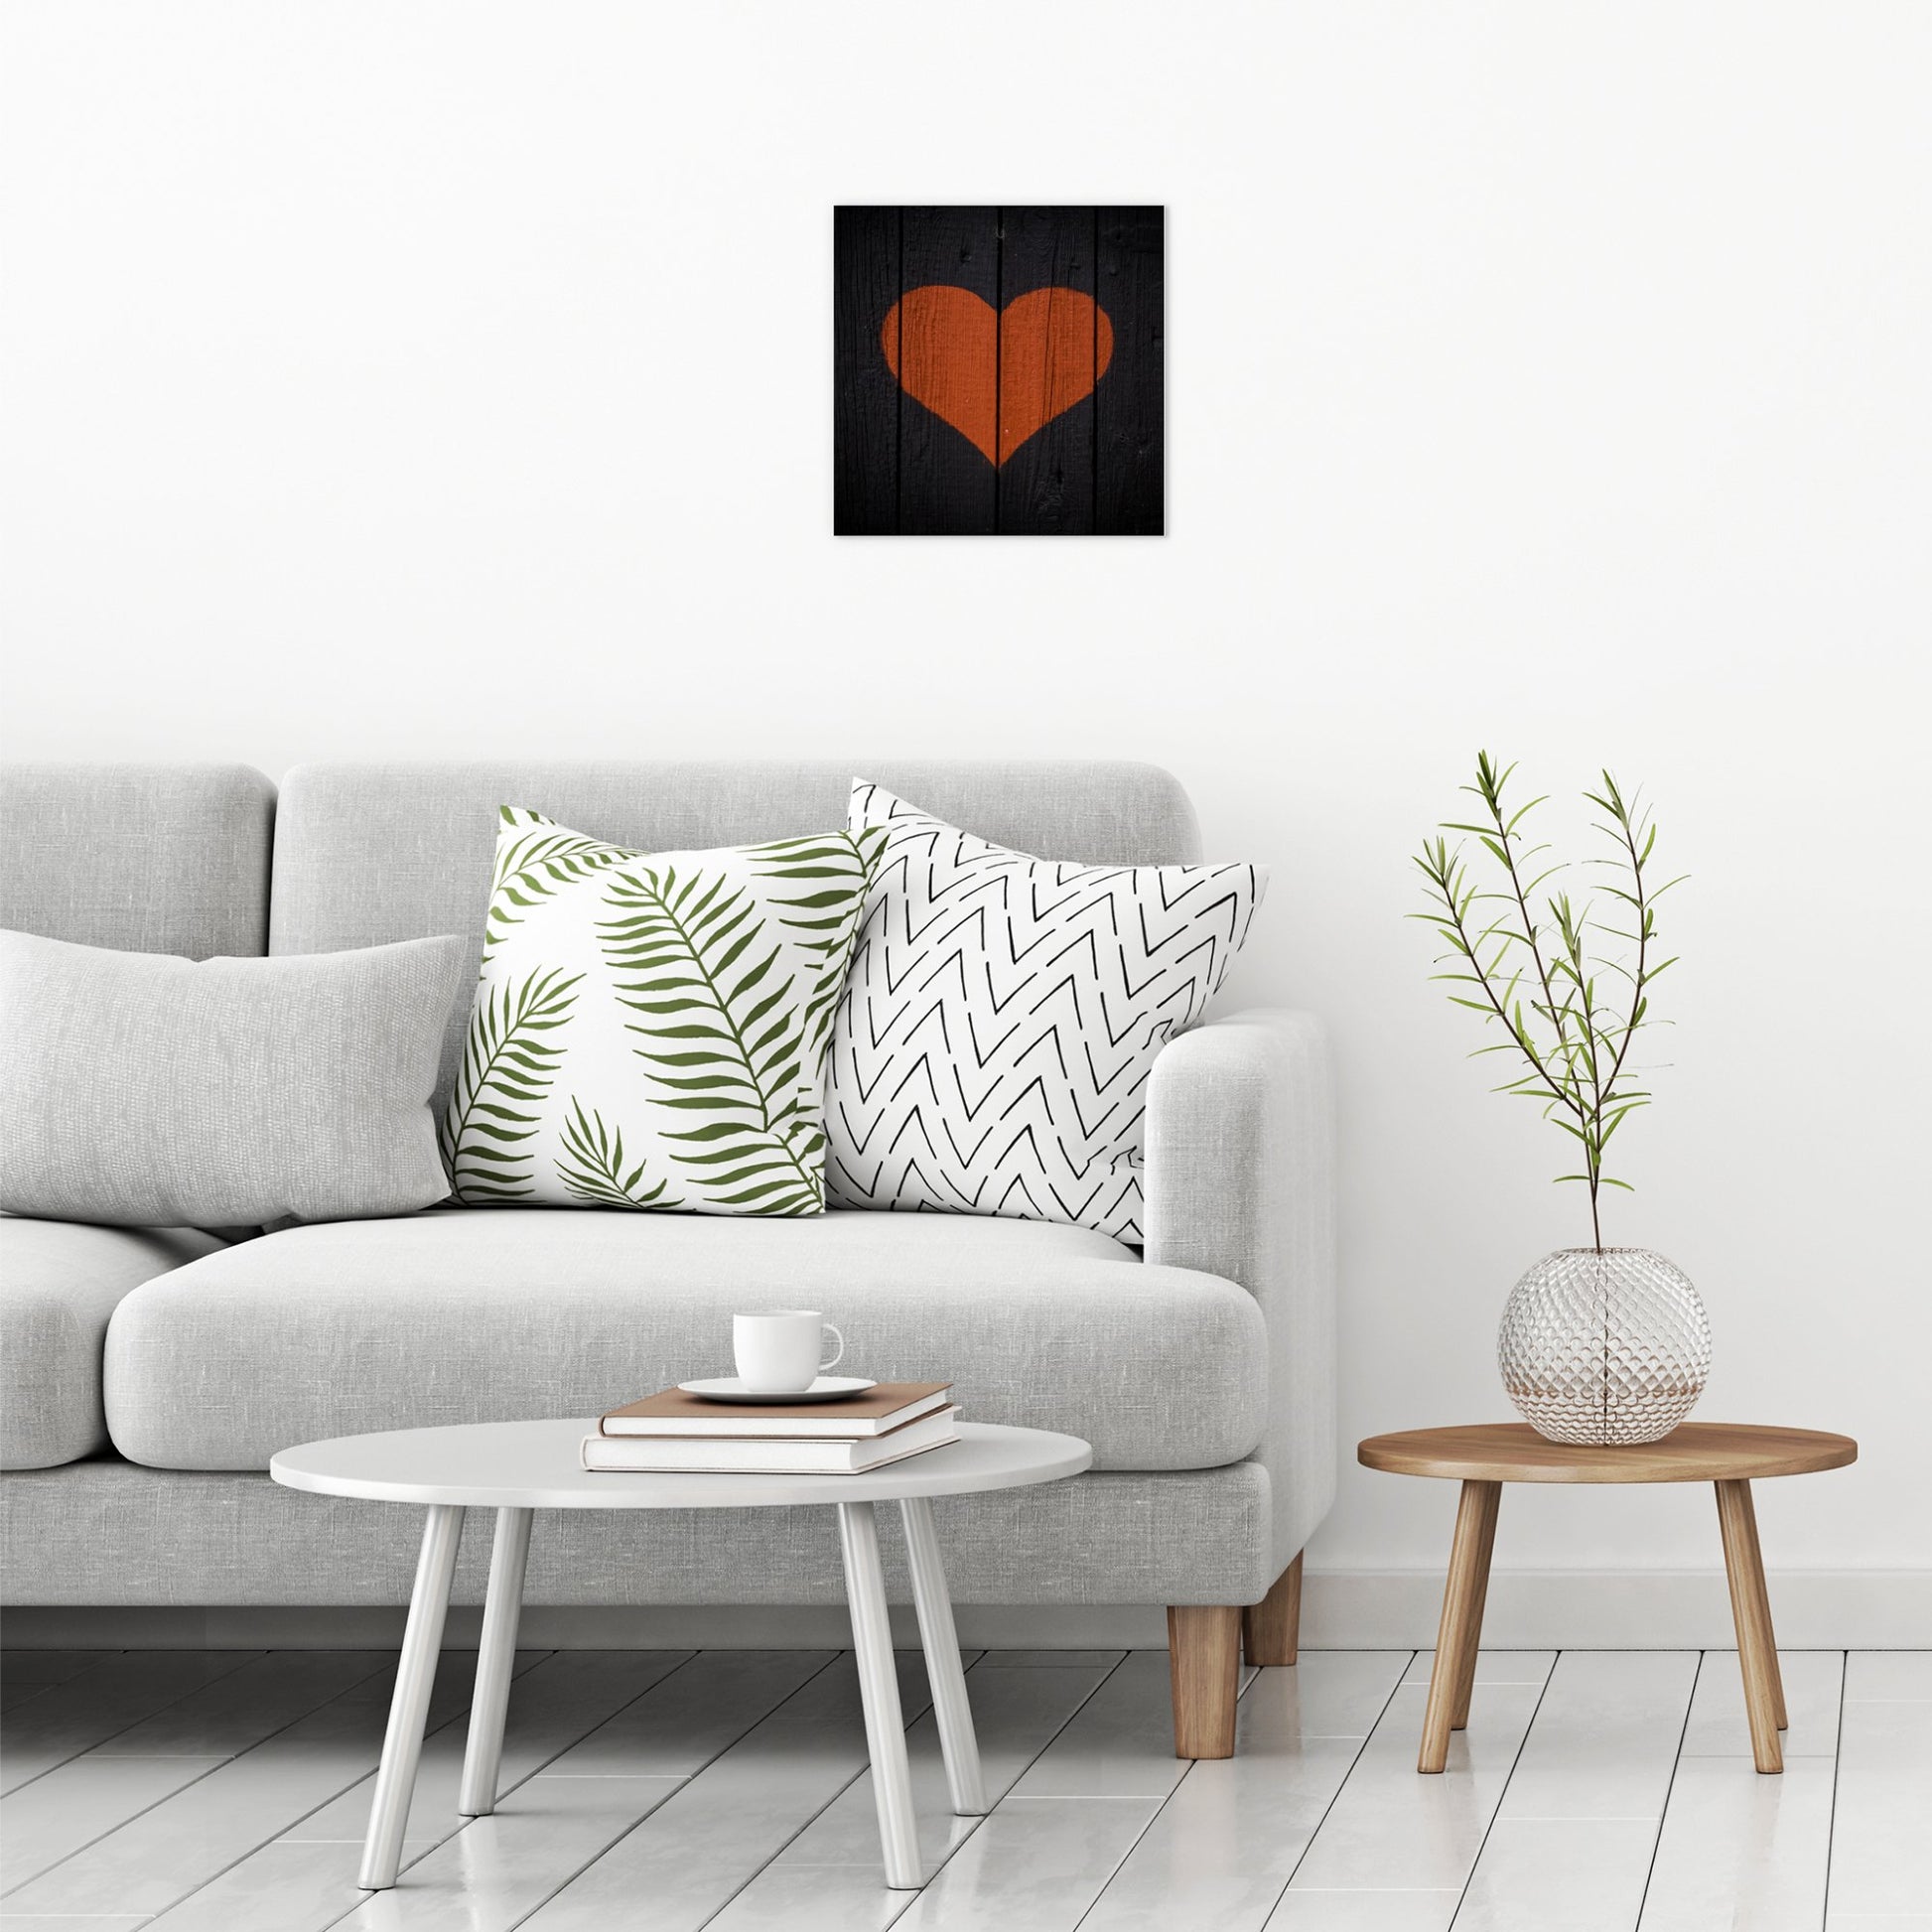 A contemporary modern room view showing a medium size metal art poster display plate with printed design of a Painted Wooden Heart